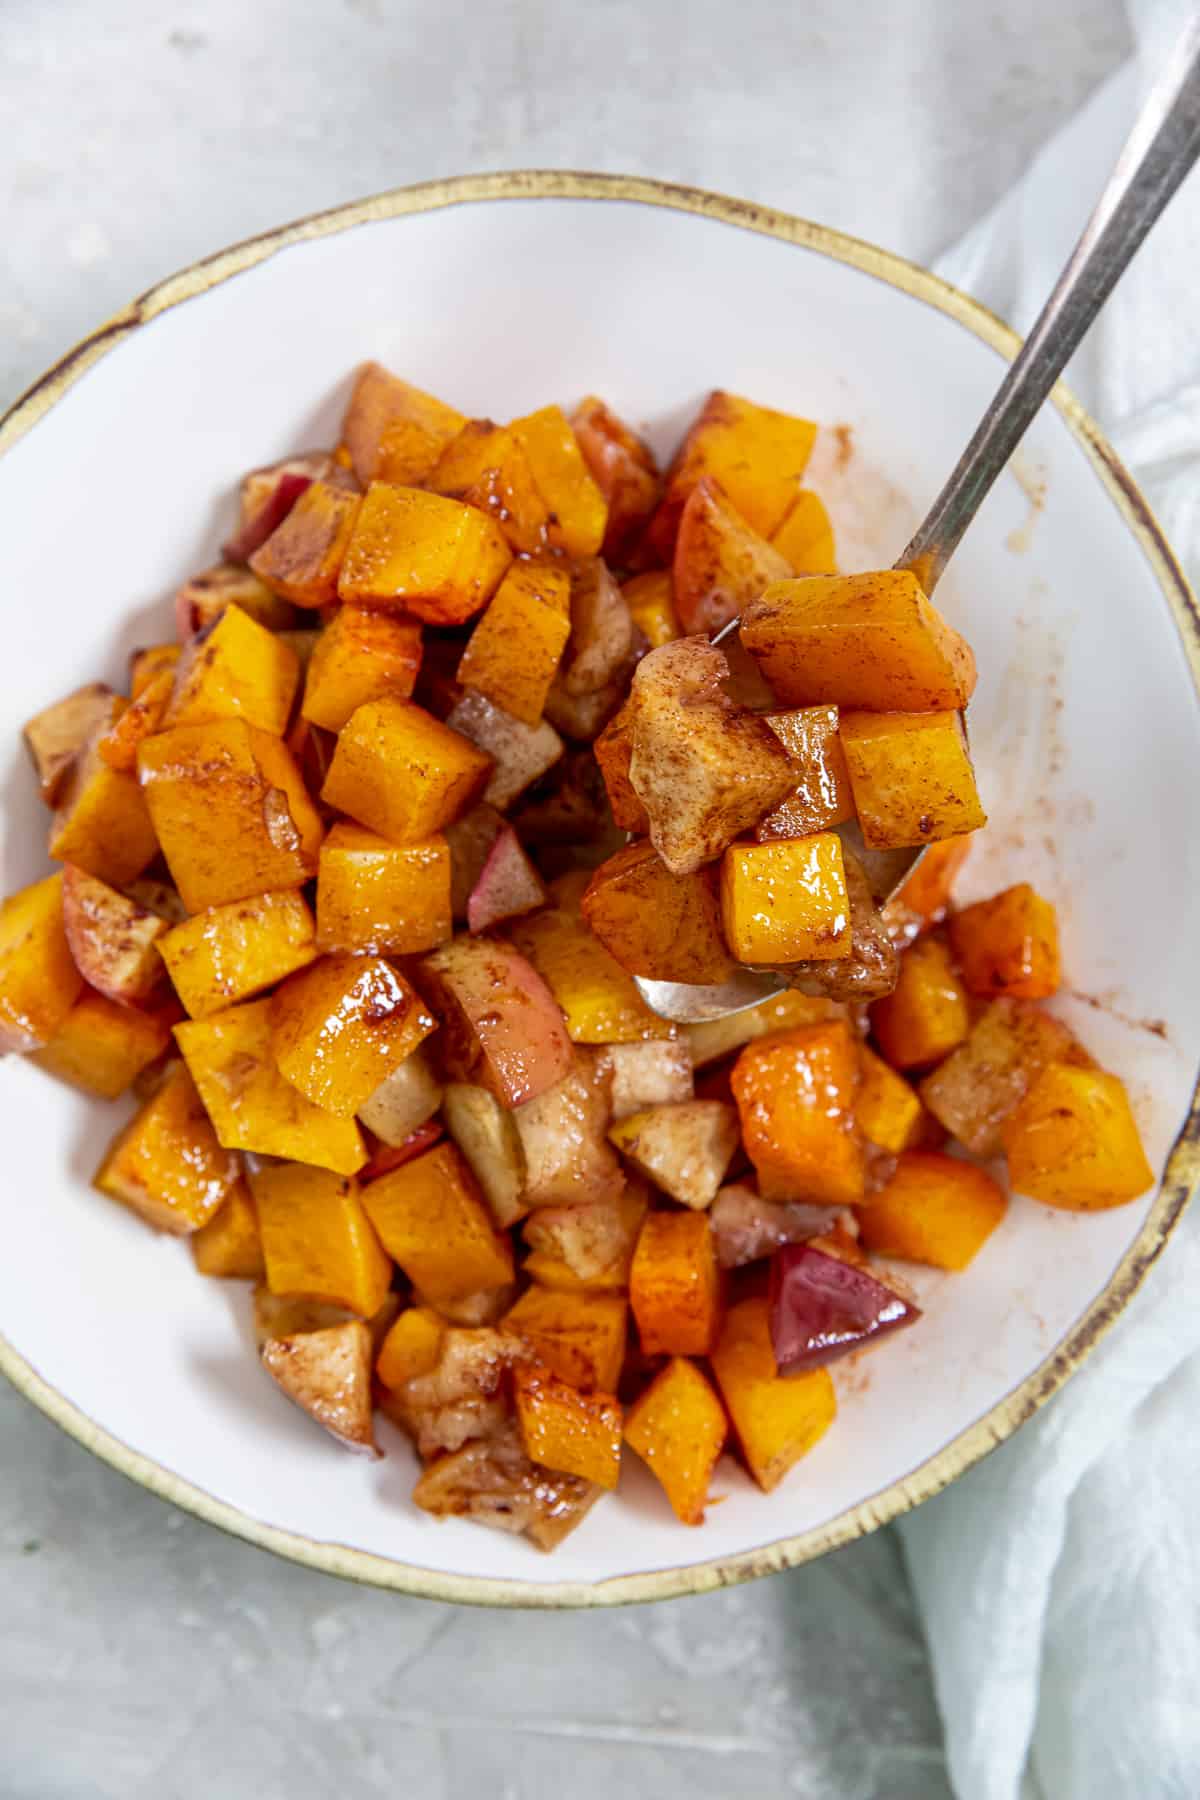 A spoon lifts roasted butternut squash and apples from a white bowl.